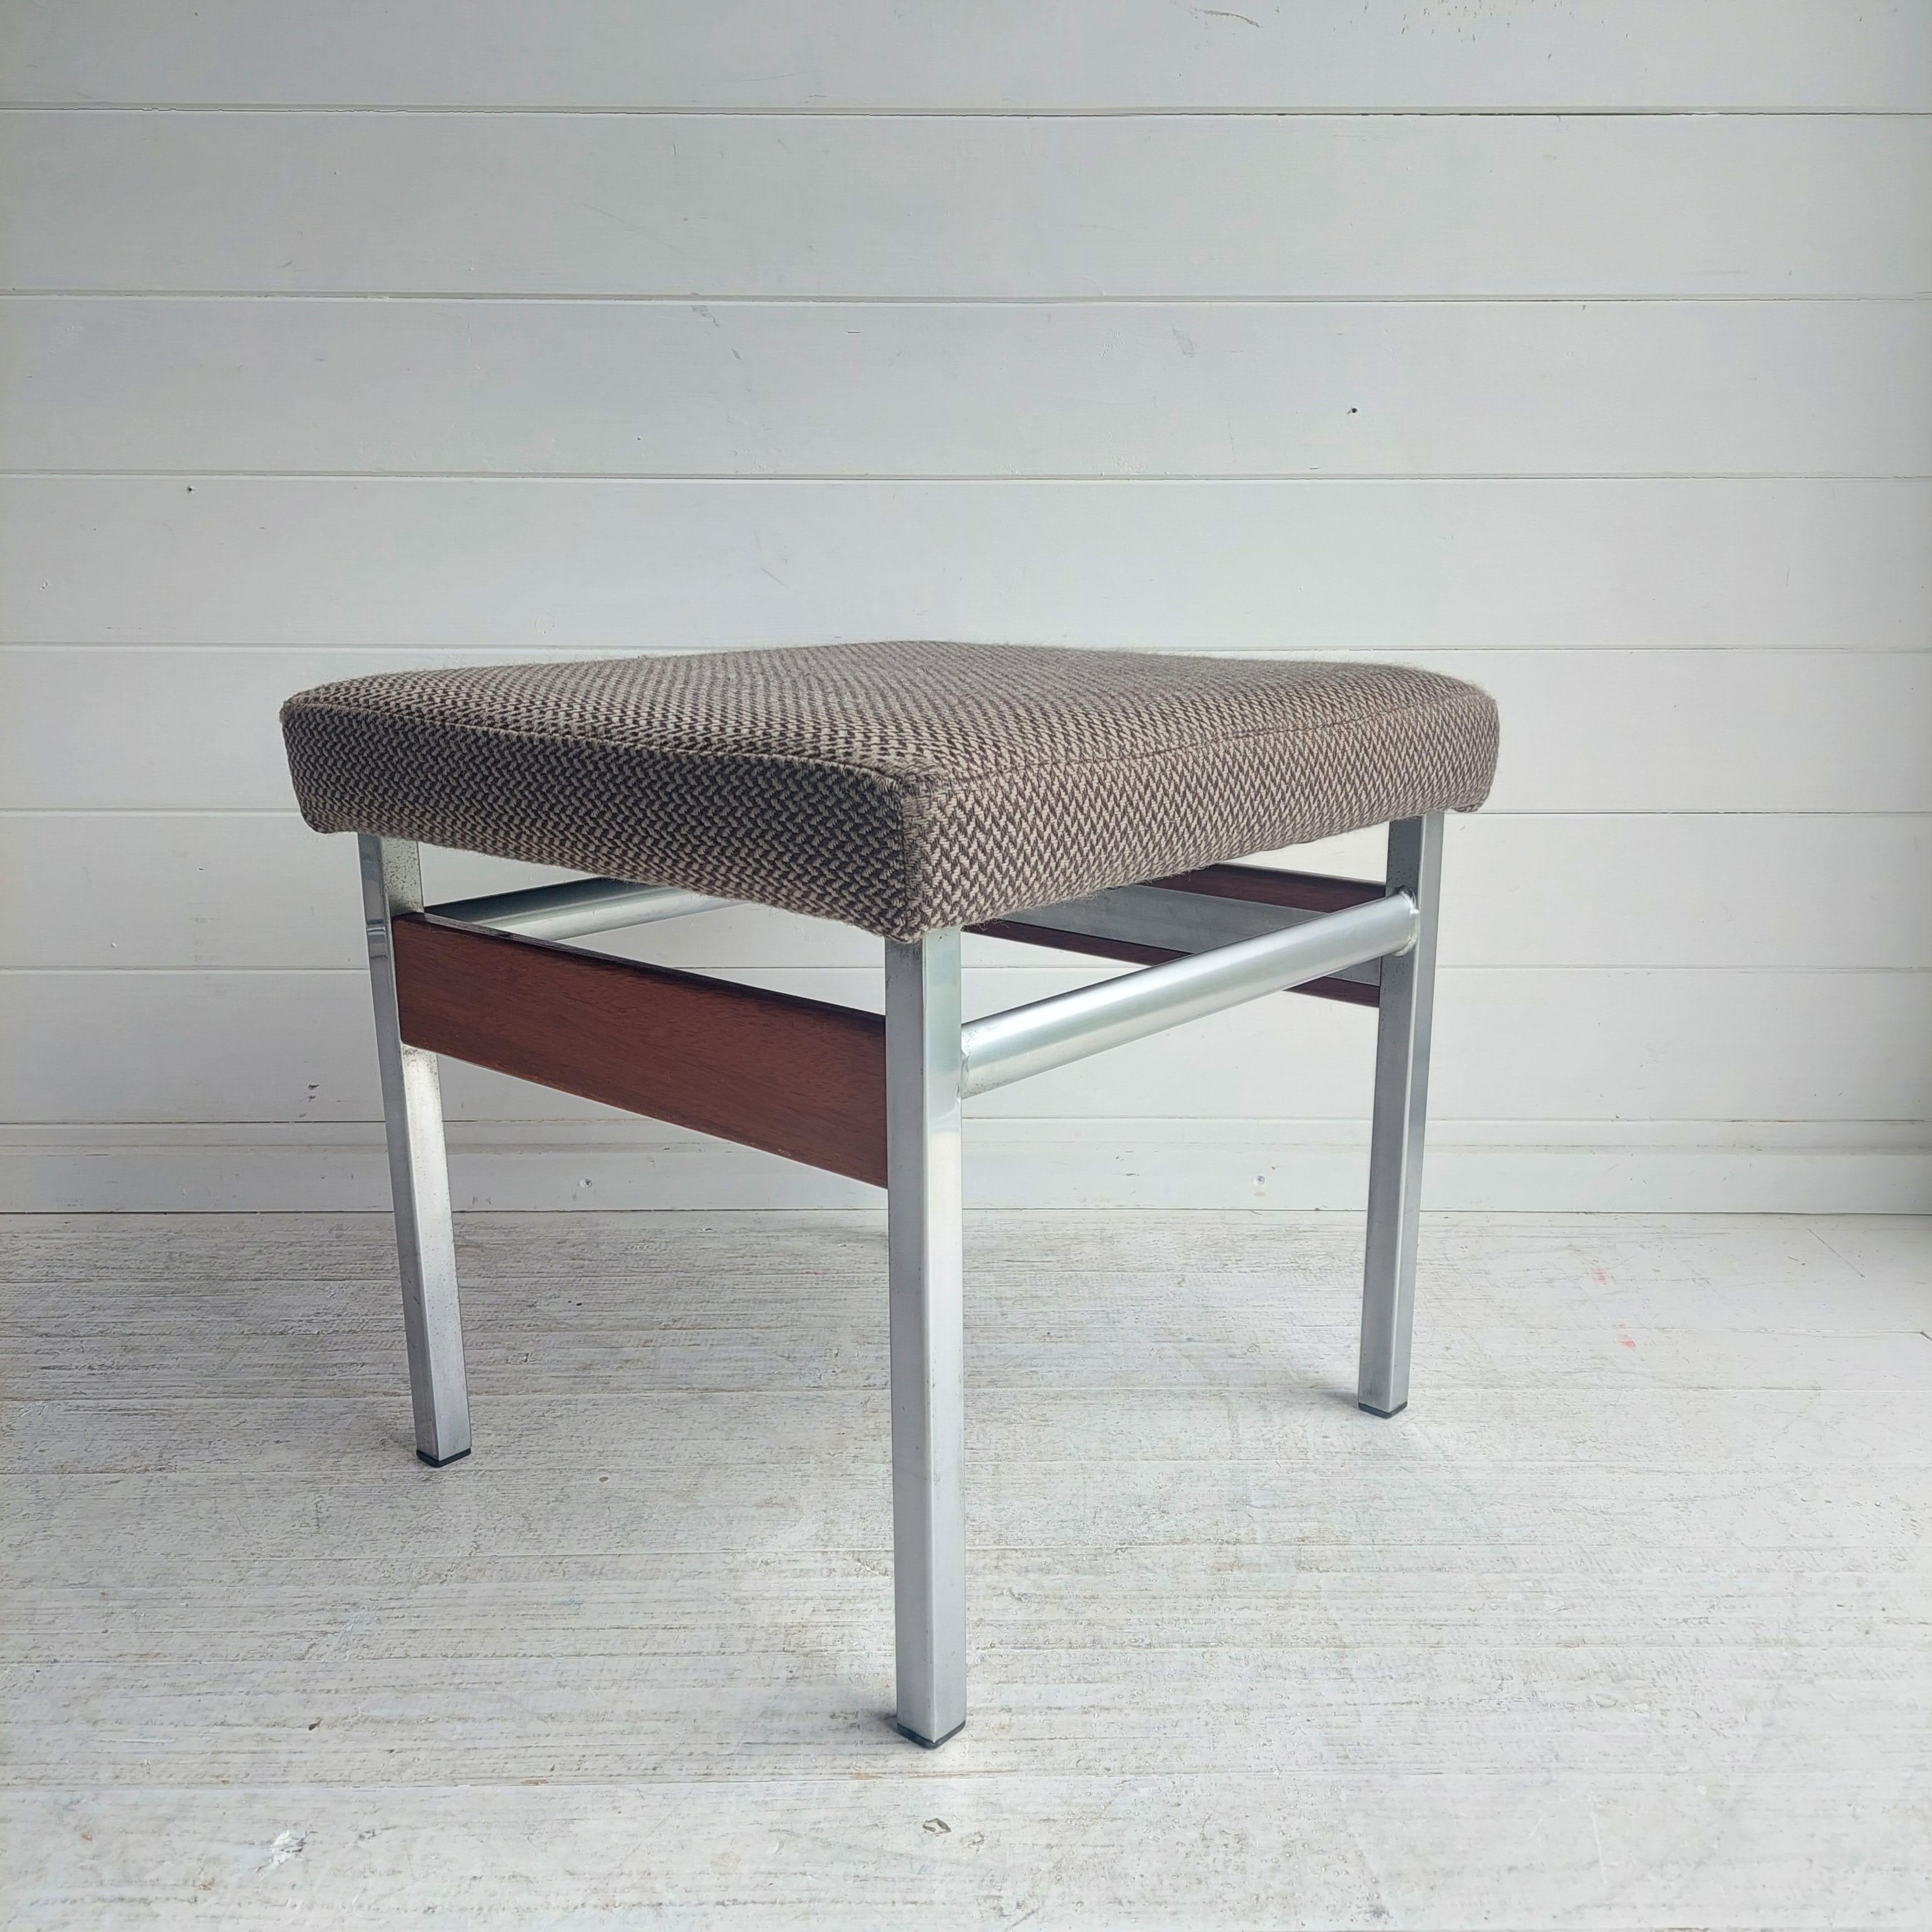 Mid Century Vintage footrest ottoman is made in typical mid-century style. 
The stool was made most probably in the 1960/70s.
Designed in the manner of Sven Ivar Dysthe for  Dokka Mobler, Norway.

The frame is manufactured from a combination of